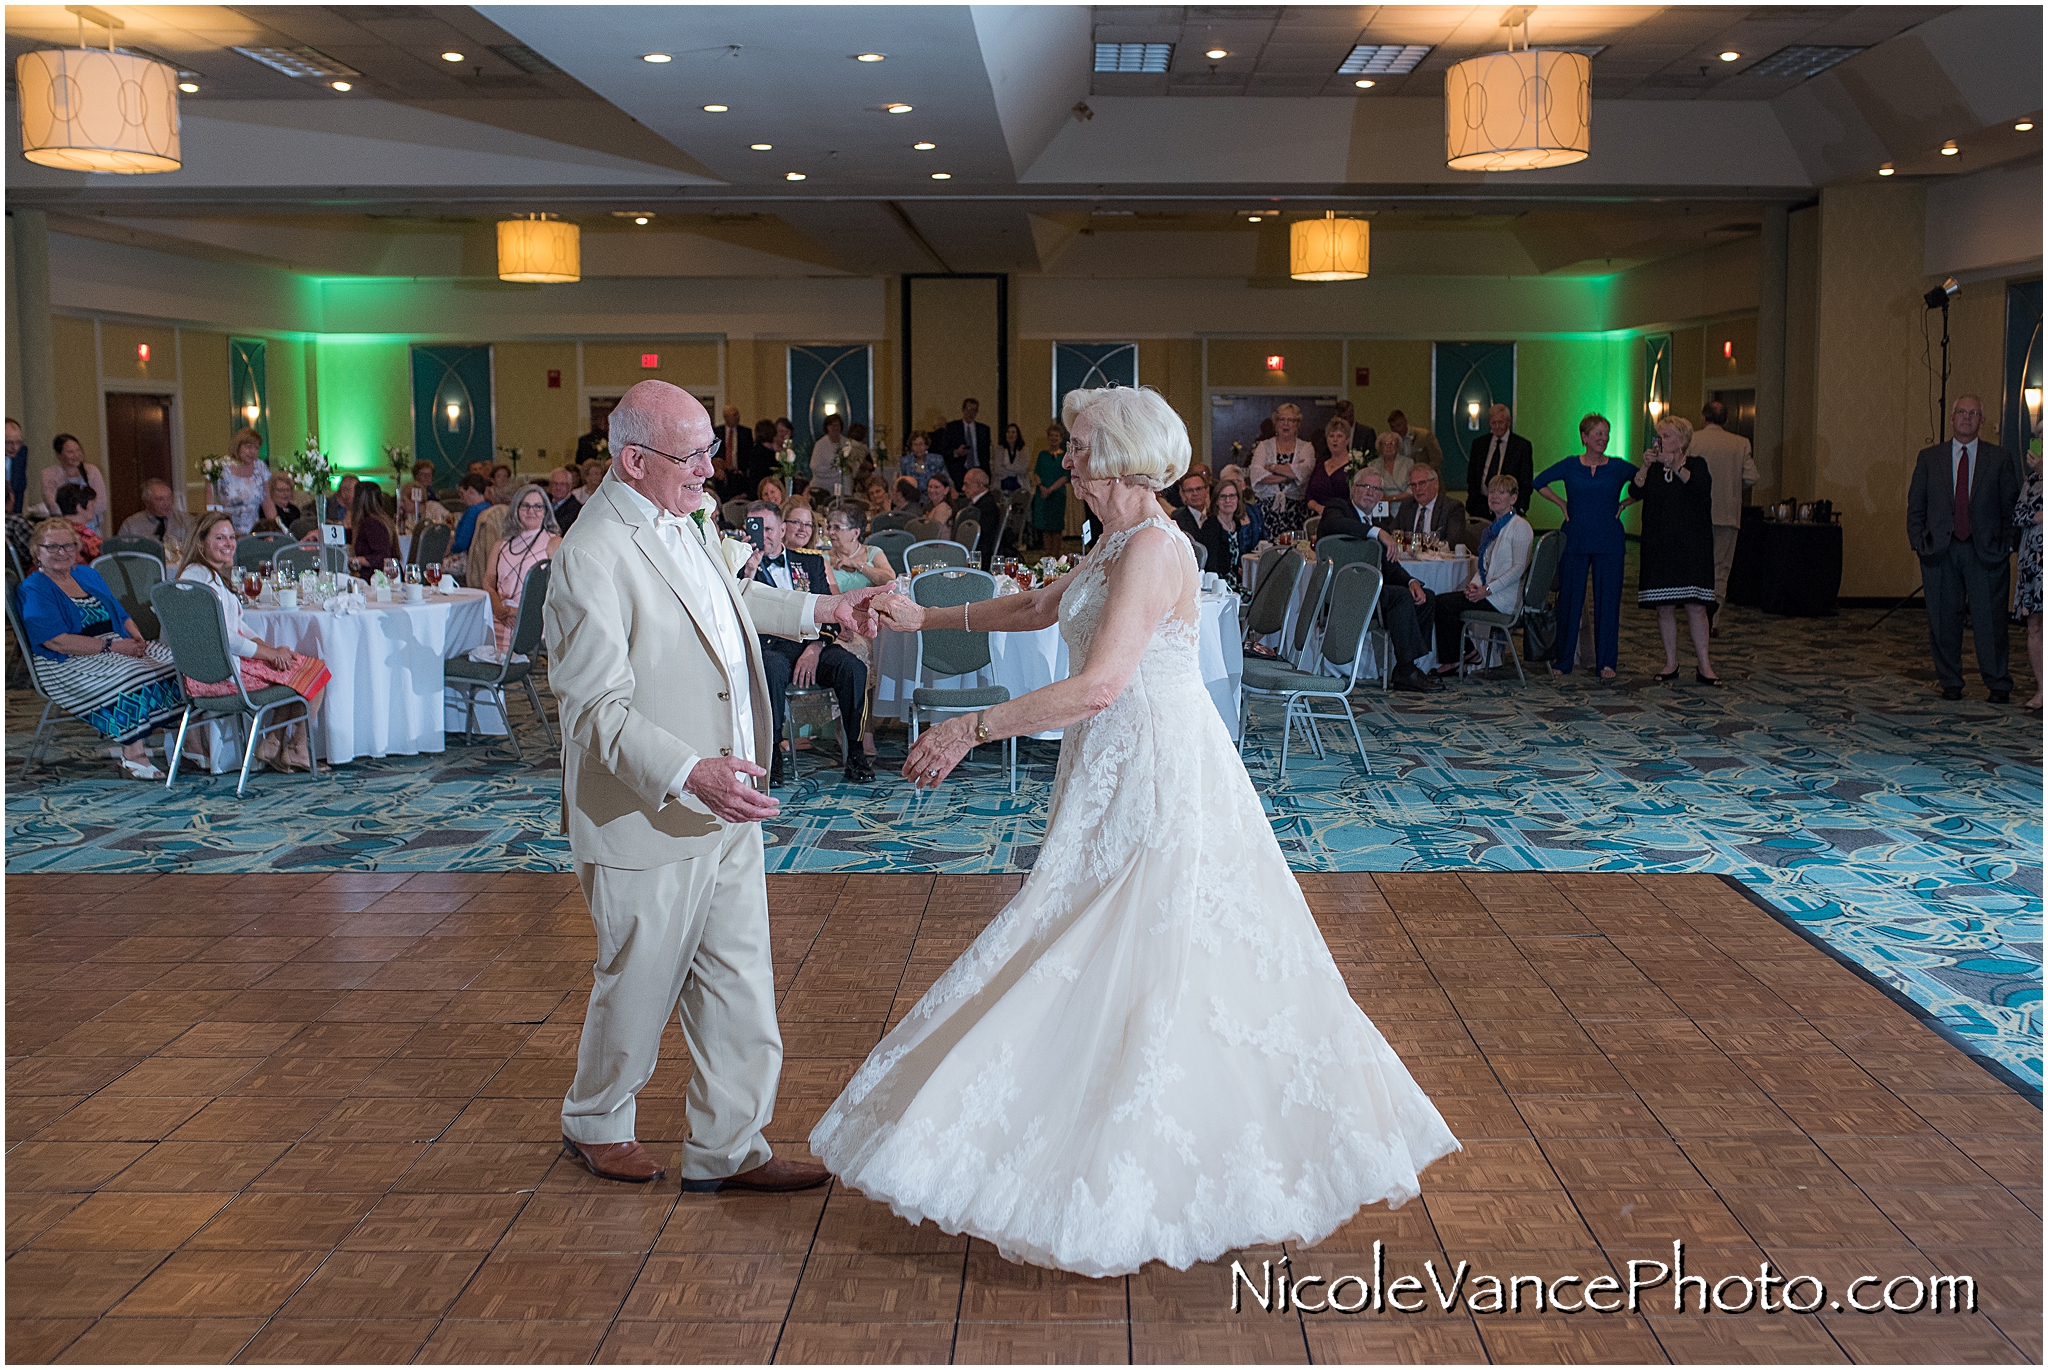 First Dance in the ballroom at the Doubletree by Hilton Richmond-Midlothian.